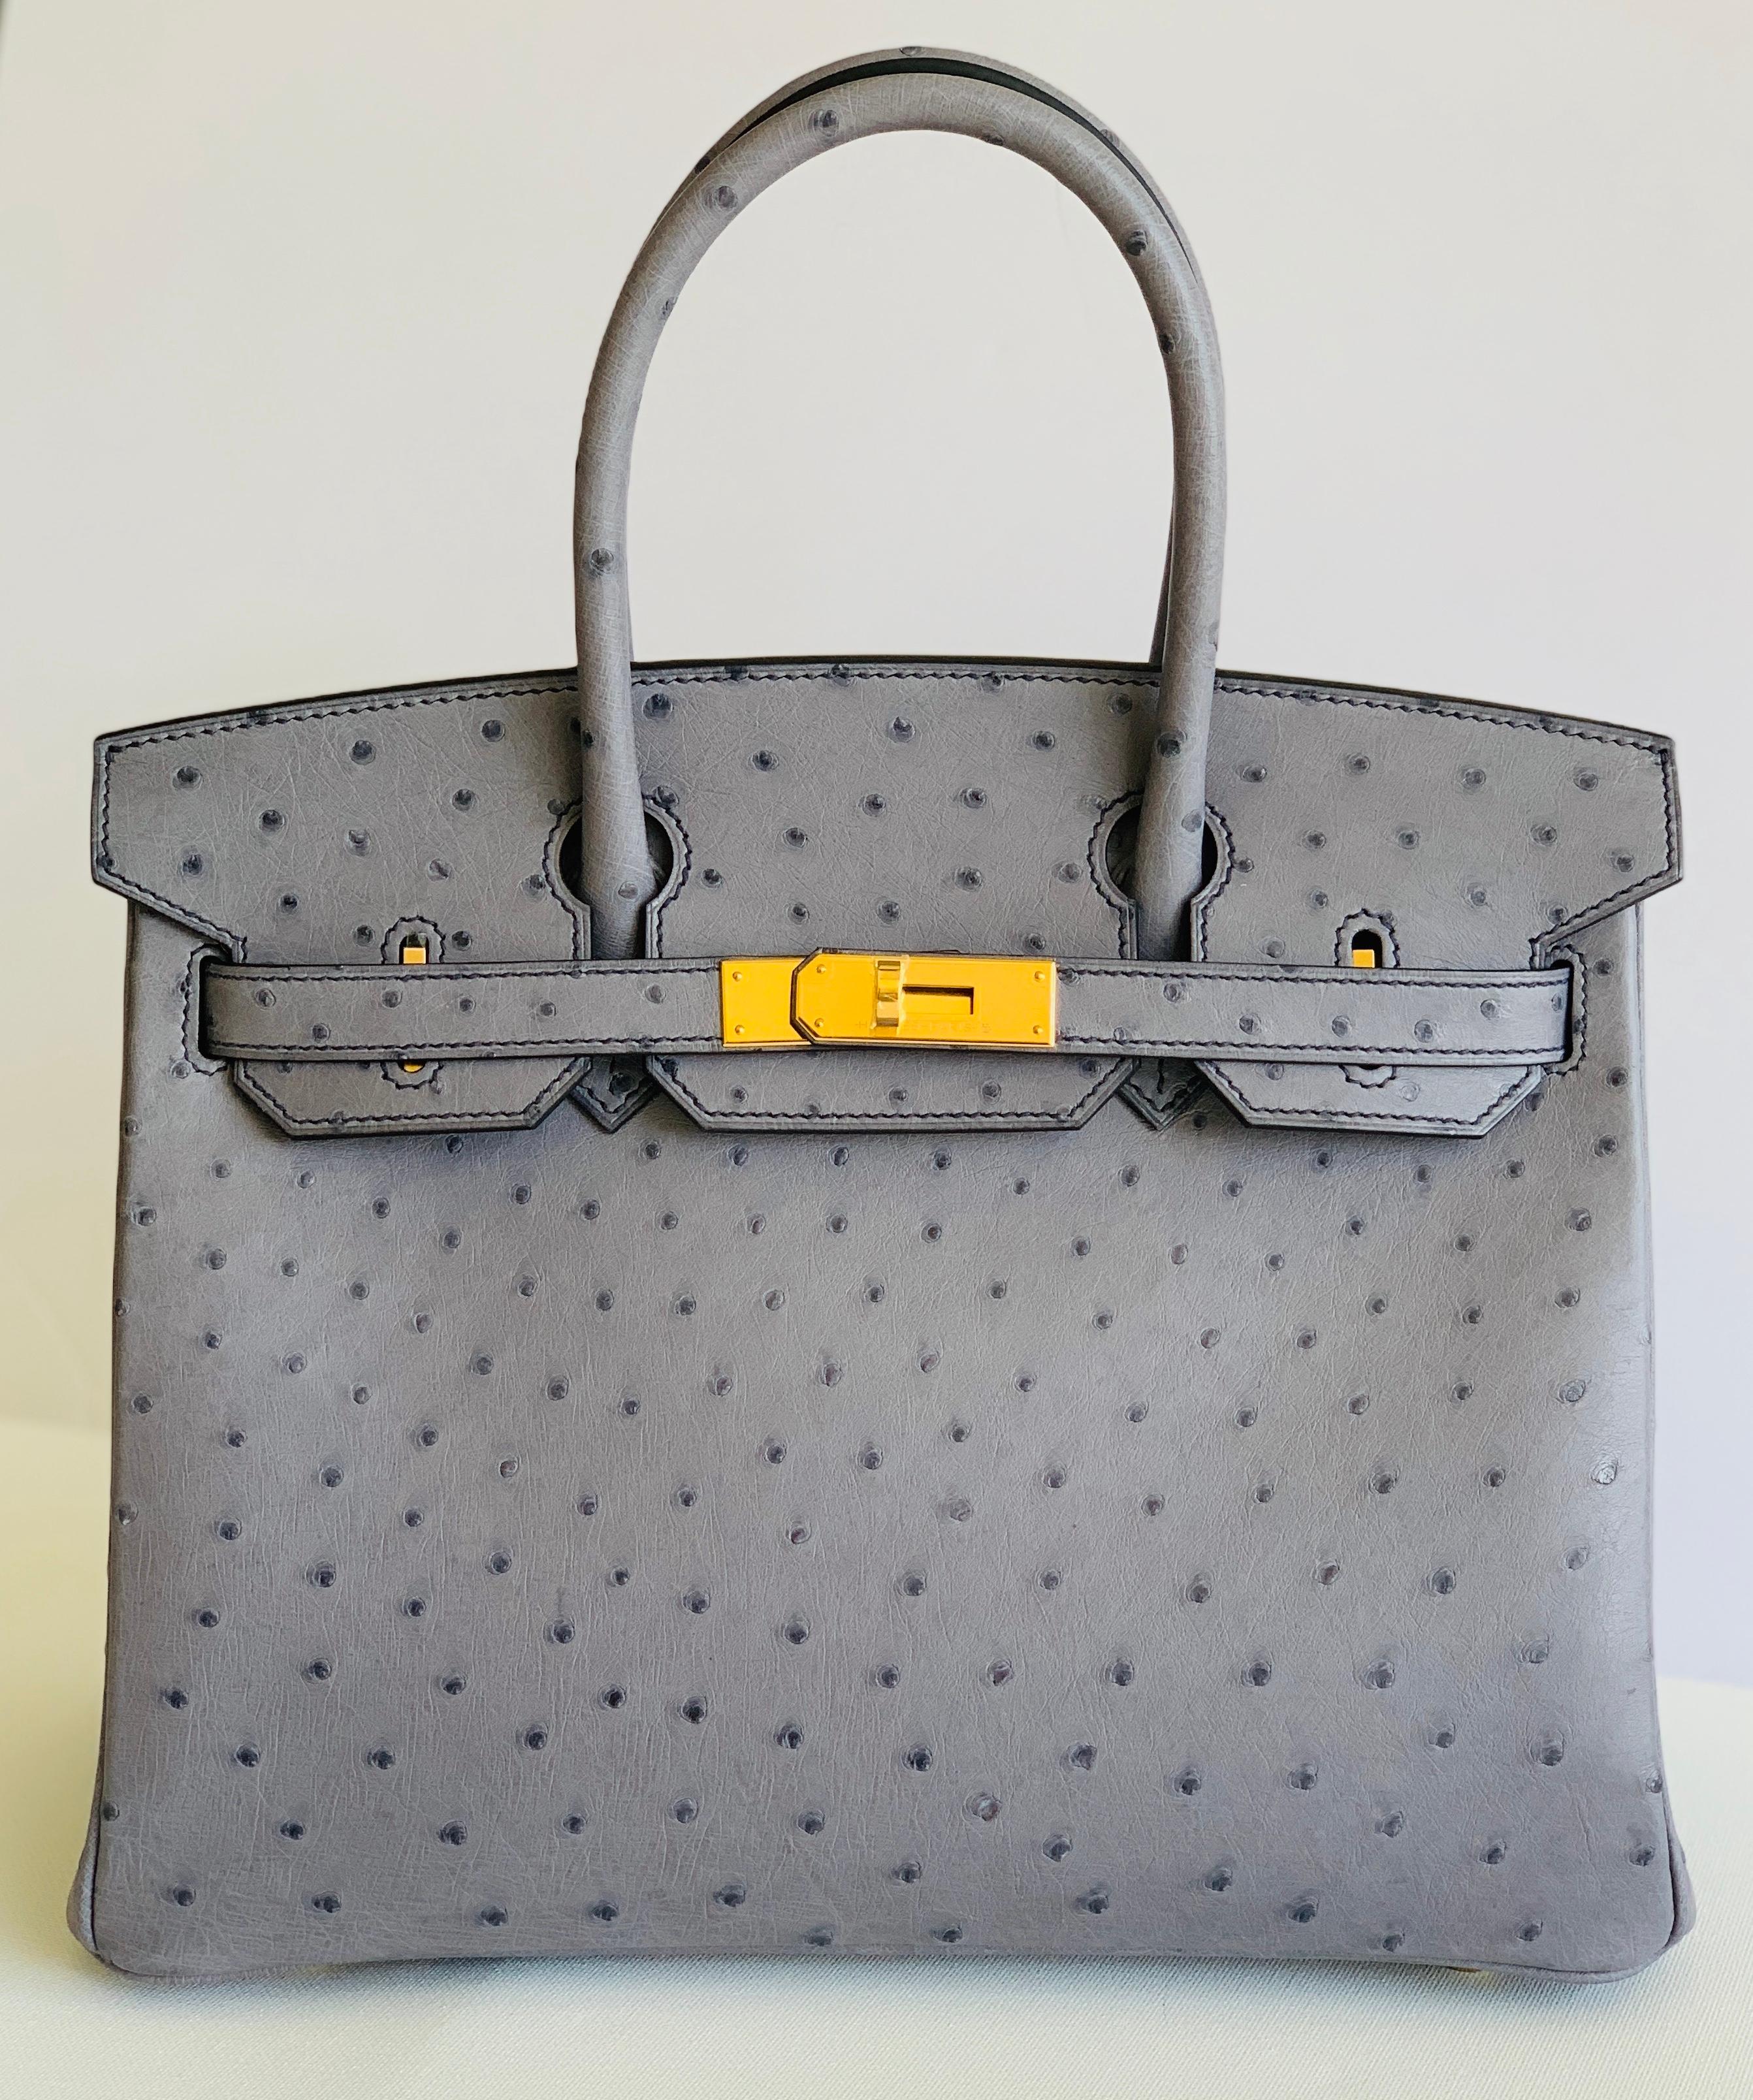 HERMÈS
This is a Special Order Birkin, denoted by the Horseshoe Stamp
Gris Agate Ostrich
Contrast Blue Iris Stitching
Blue Iris Chevre Lining
Absolutely Gorgeous bag to add to any collection
This bag took almost 2 years to get from date of